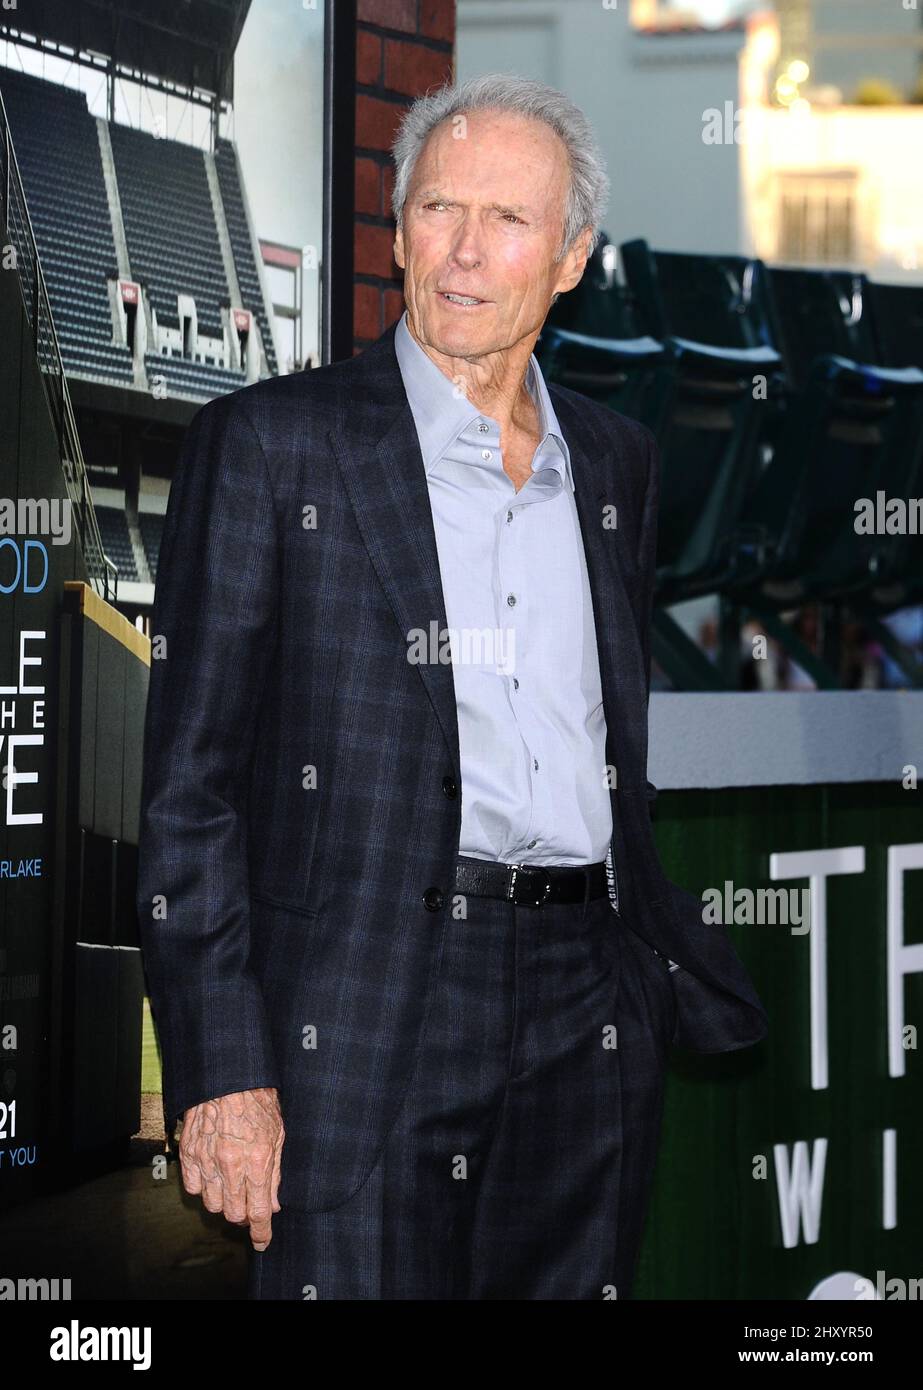 Clint Eastwood attending the premiere of 'Trouble With The Curve' in Los Angeles. Stock Photo